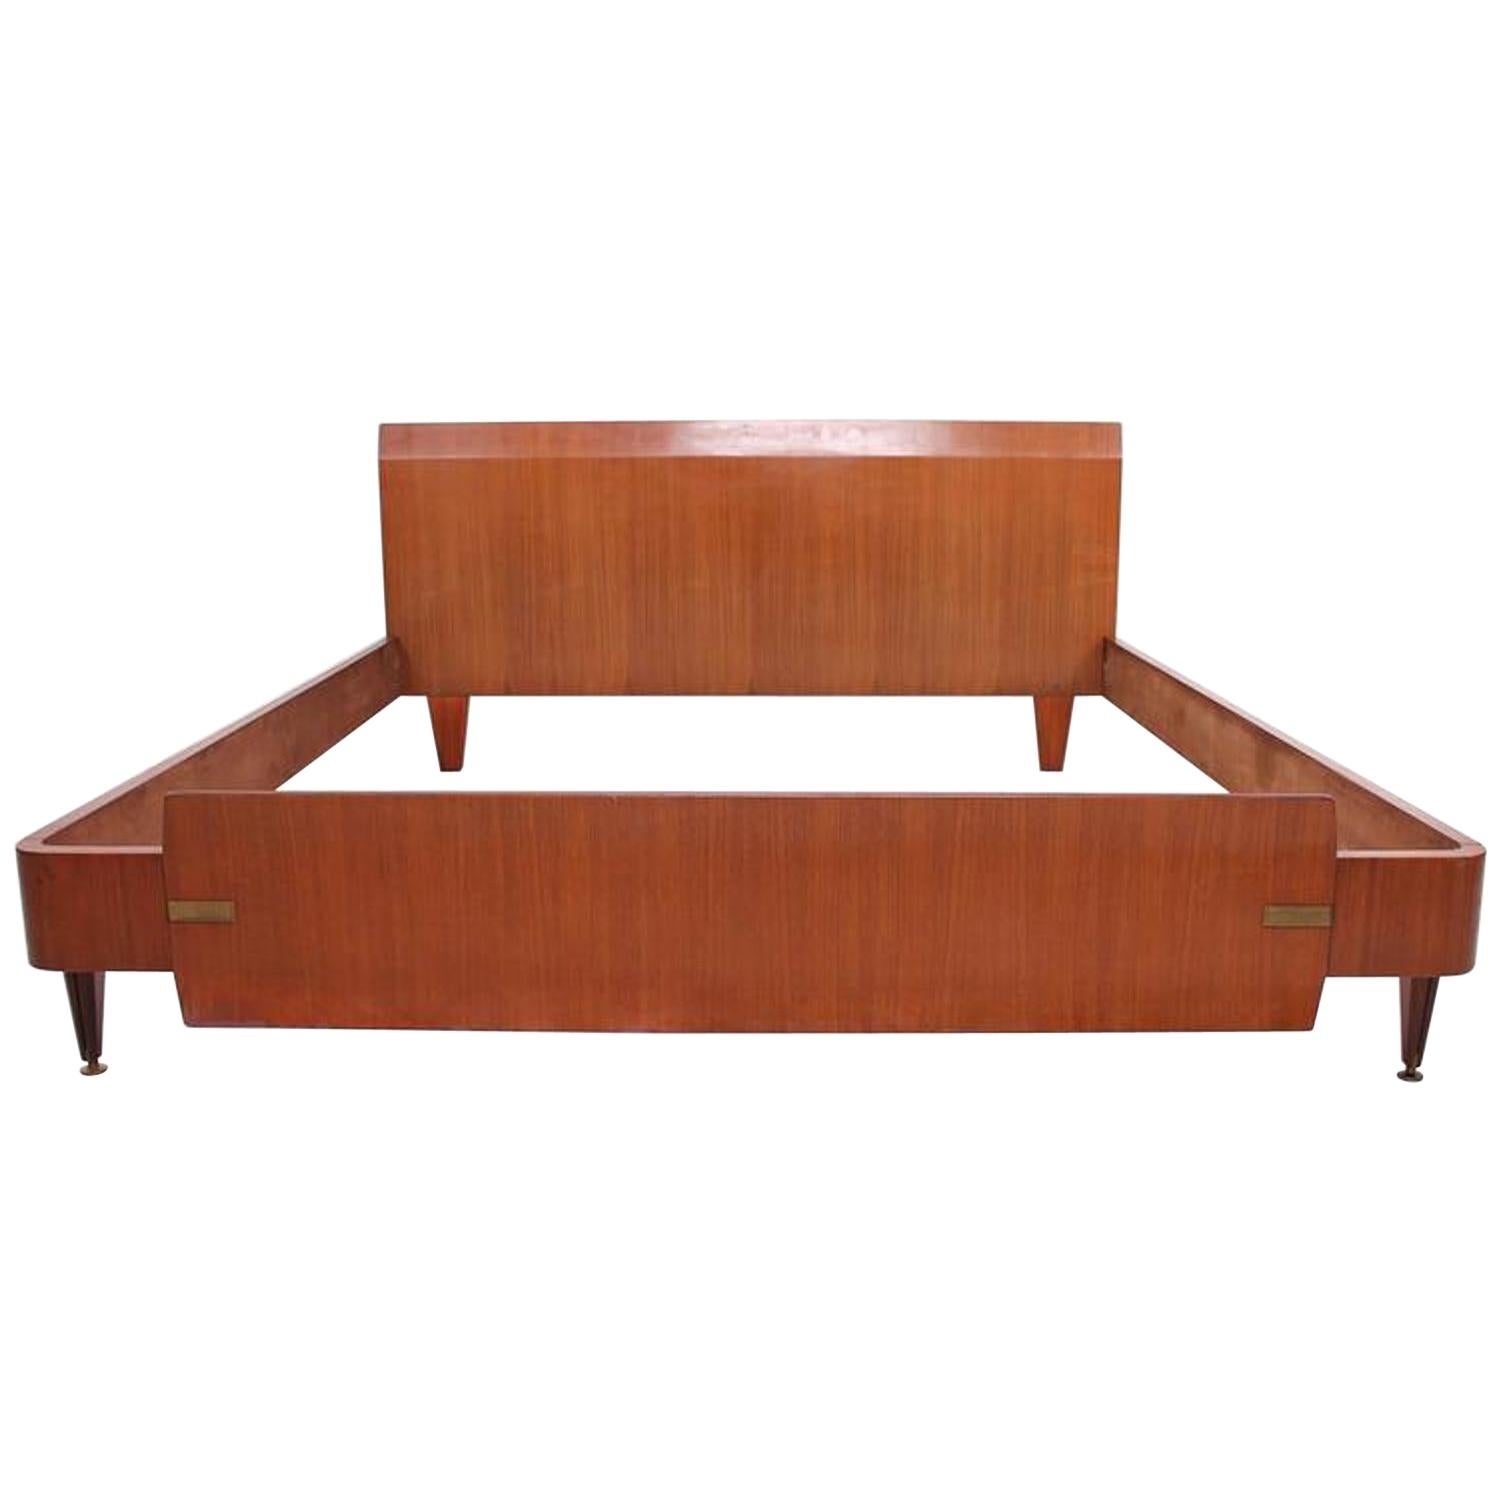 Bed
MCM Italian Wood custom King Bed Frame geometric angles in mahogany sapele wood with brass detail ITALY
Attributed to Vittorio DASSI in the style of Gio Ponti. Unmarked.
H 30 in. x W 77 in. x D 80 in. 
Original unrestored vintage condition. Very